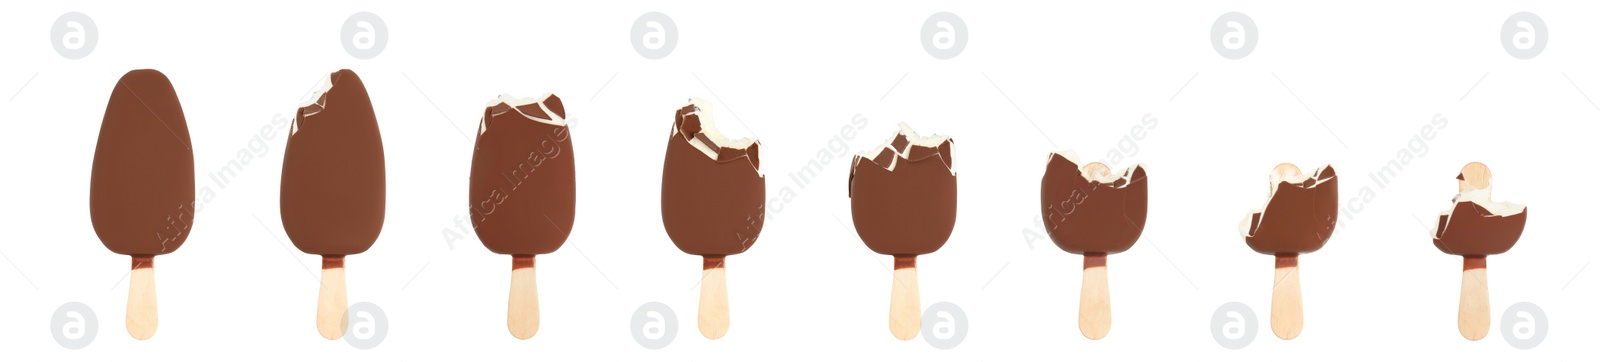 Image of Delicious glazed ice cream on white background, collage. Banner design